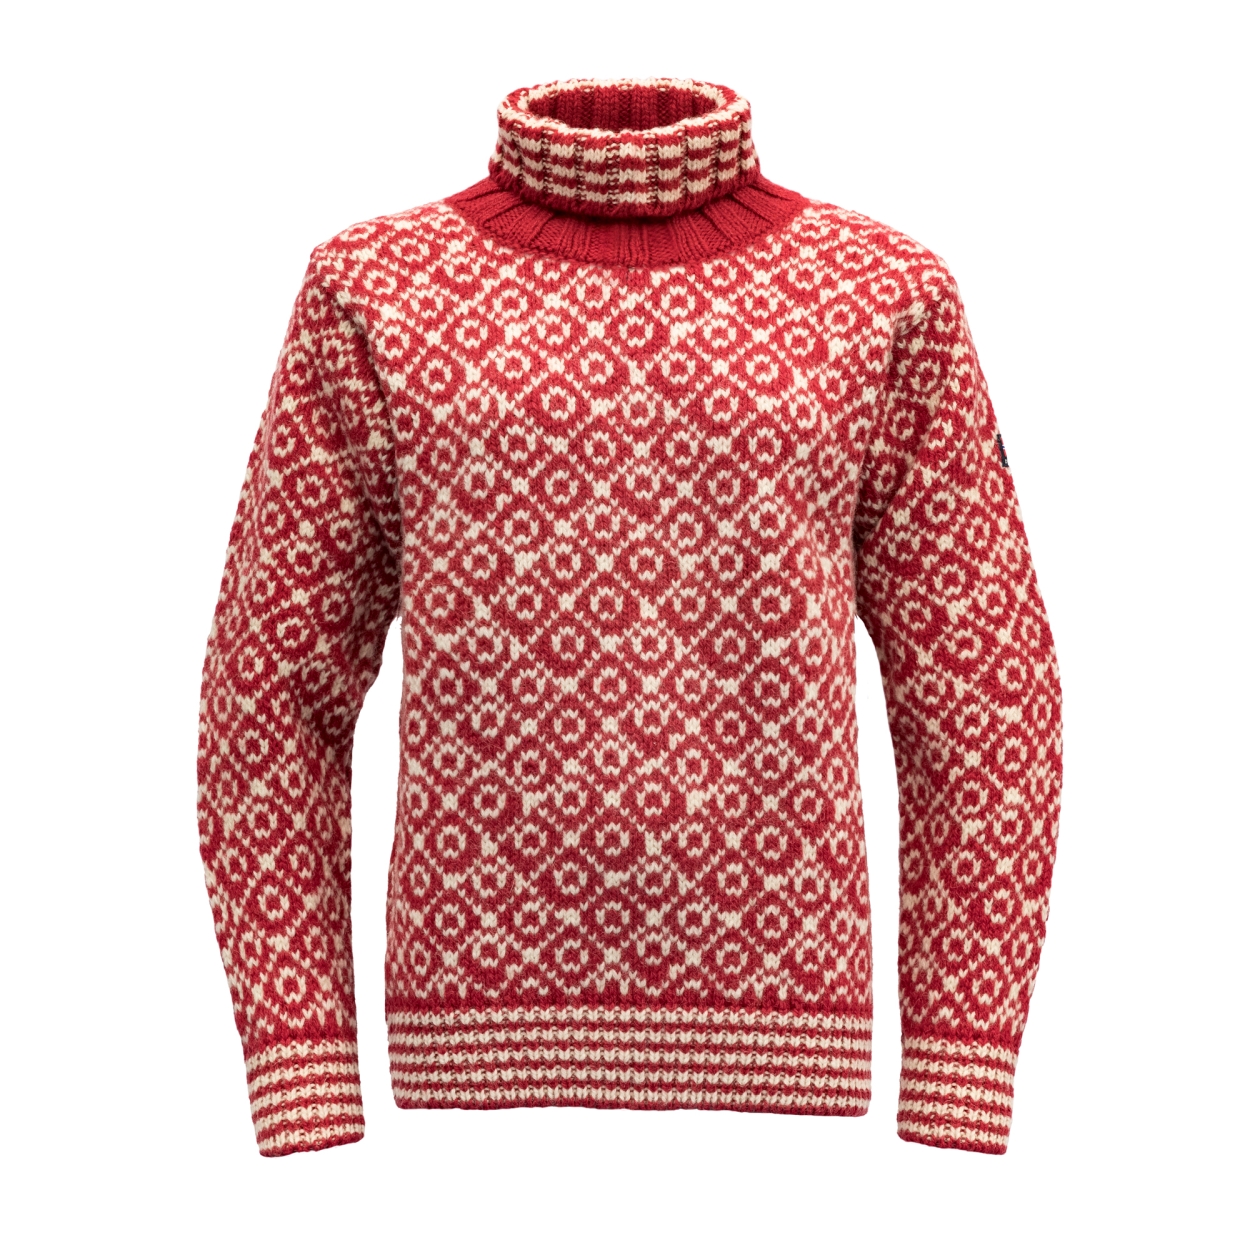 Svalbard Sweater High Neck, hindberry/offwhite